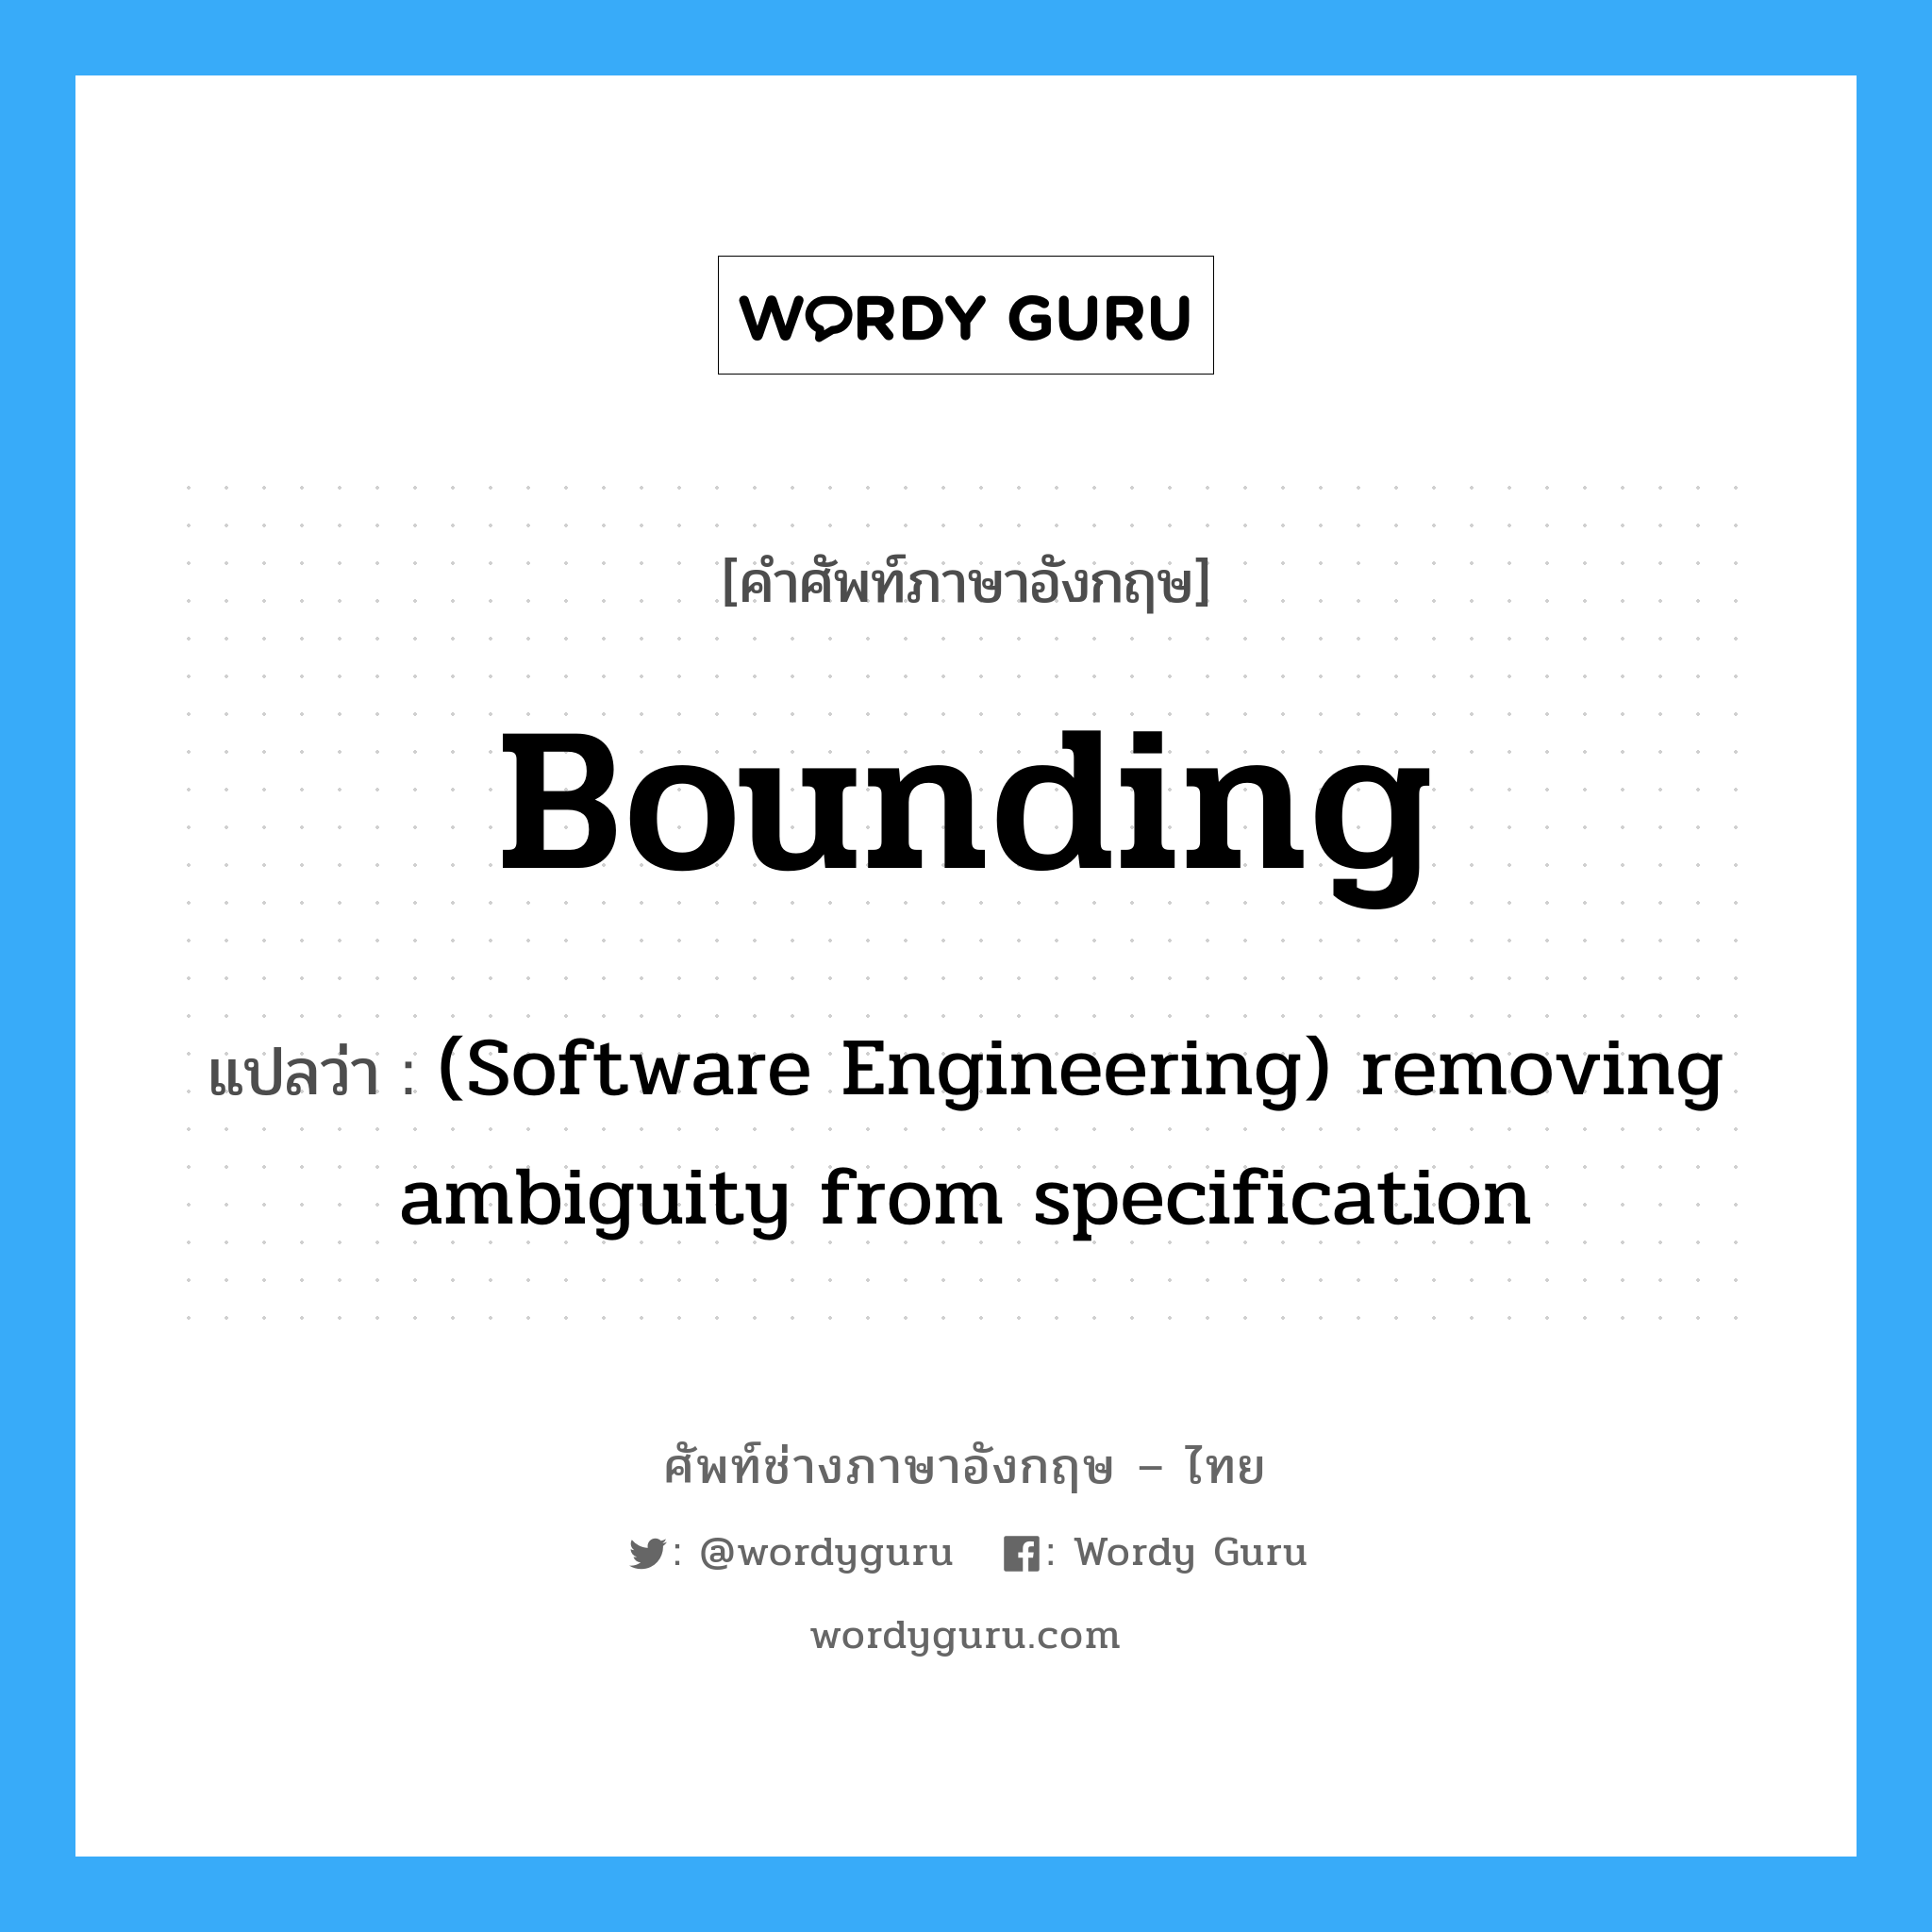 Bounding แปลว่า?, คำศัพท์ช่างภาษาอังกฤษ - ไทย Bounding คำศัพท์ภาษาอังกฤษ Bounding แปลว่า (Software Engineering) removing ambiguity from specification